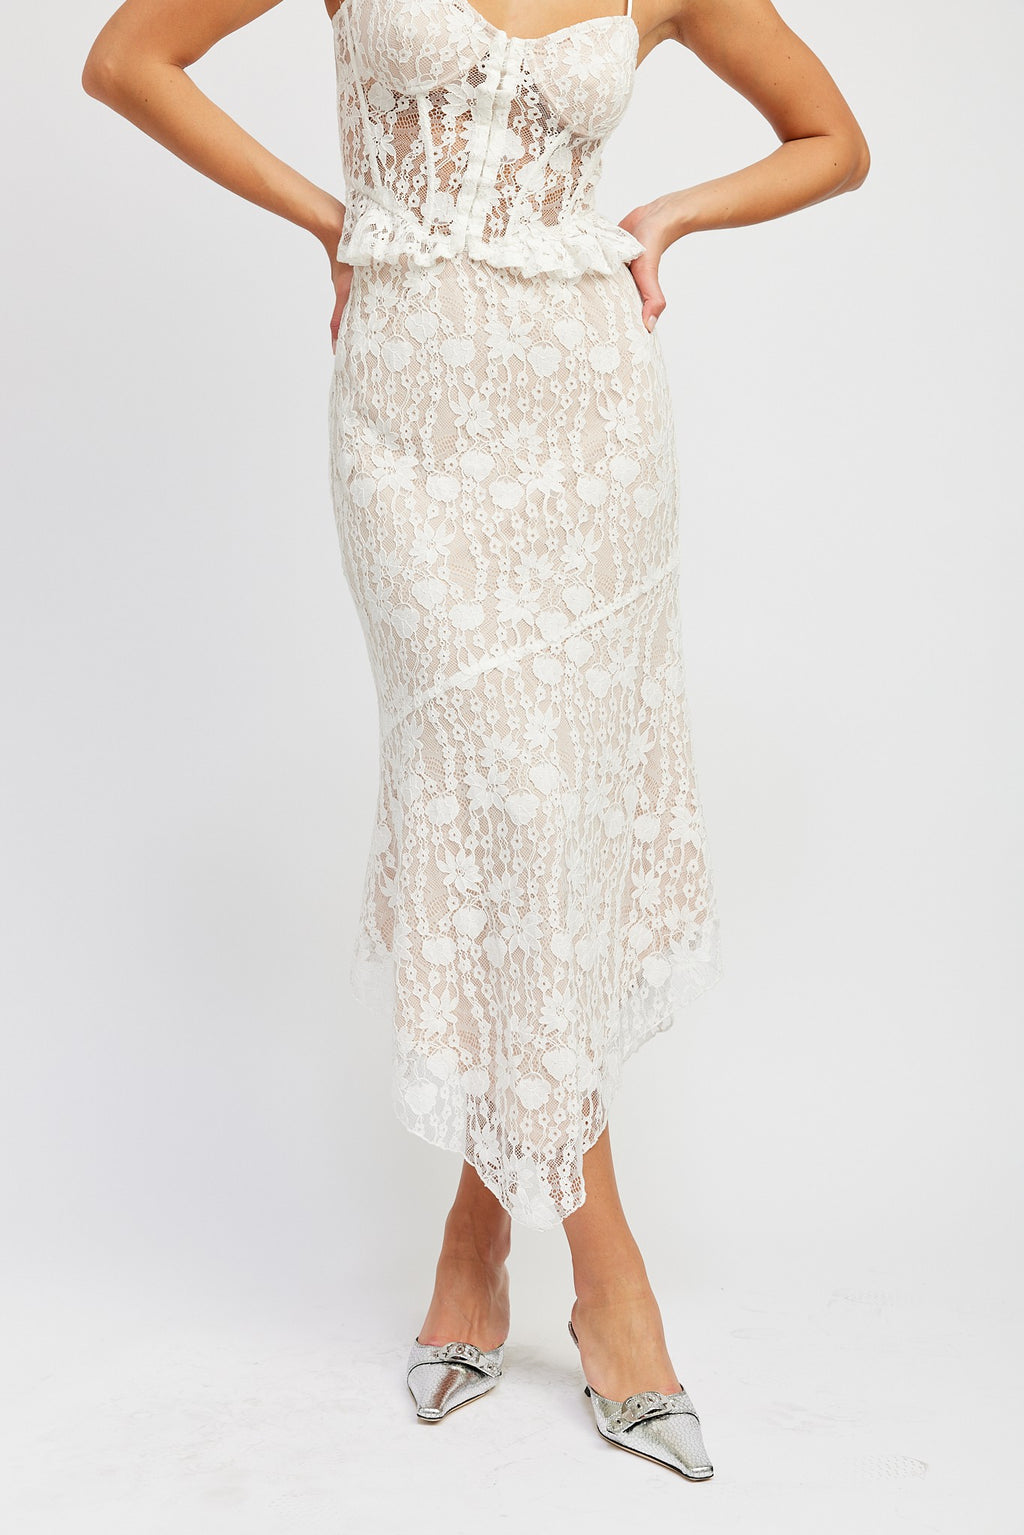 LACE MAXI SKIRT (set sold separately)